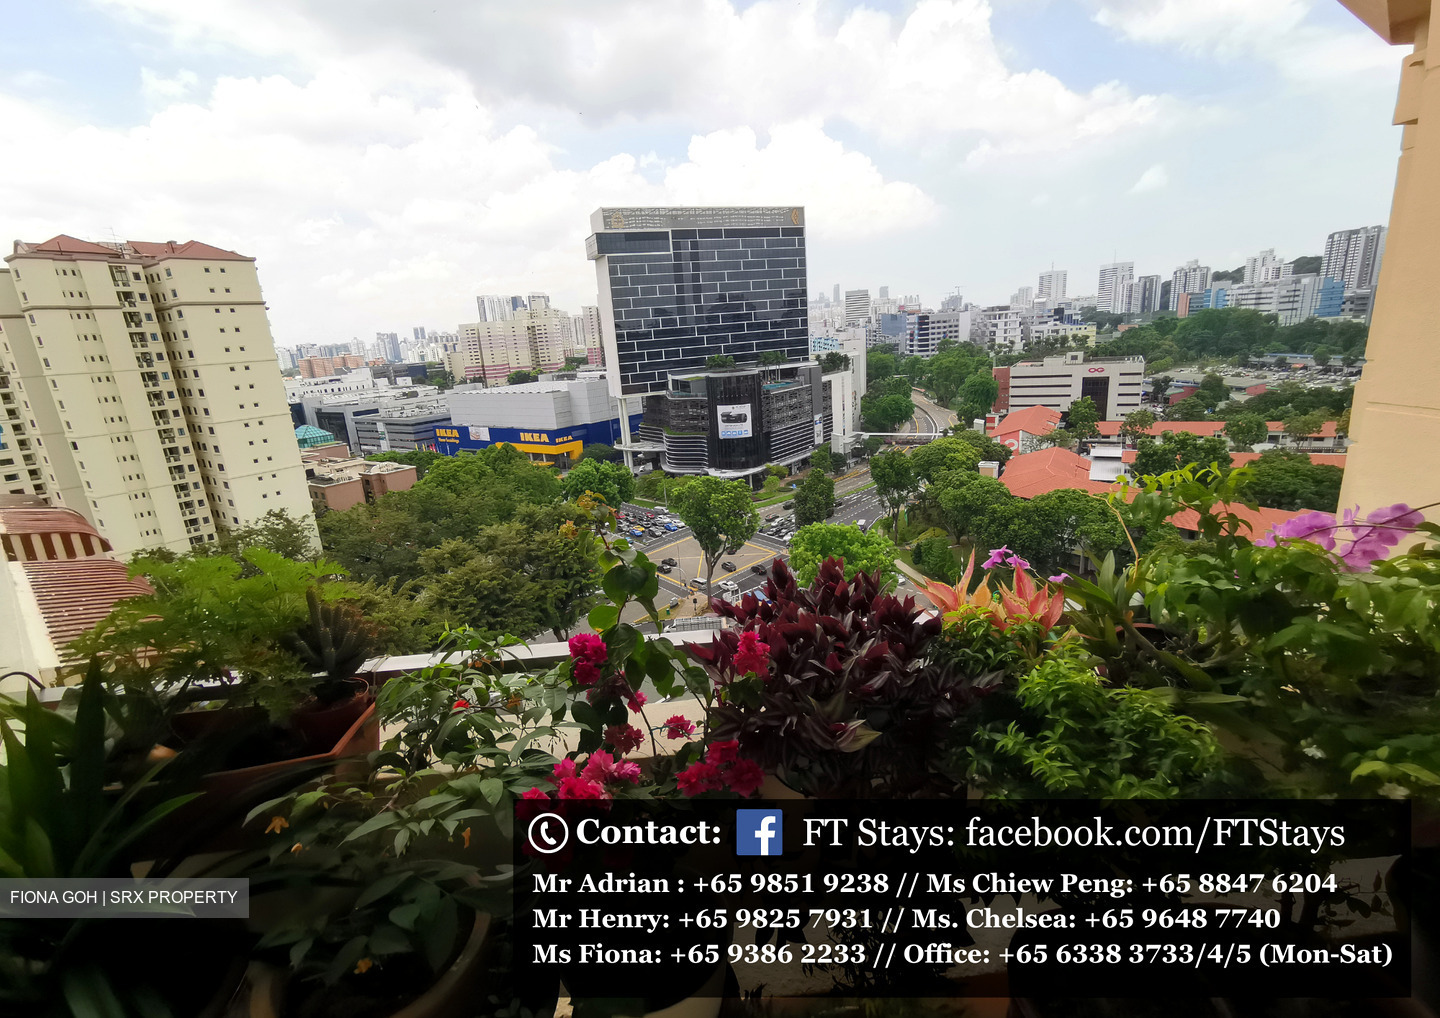 Queensway Tower / Queensway Shopping Centre (D3), Apartment #430712071